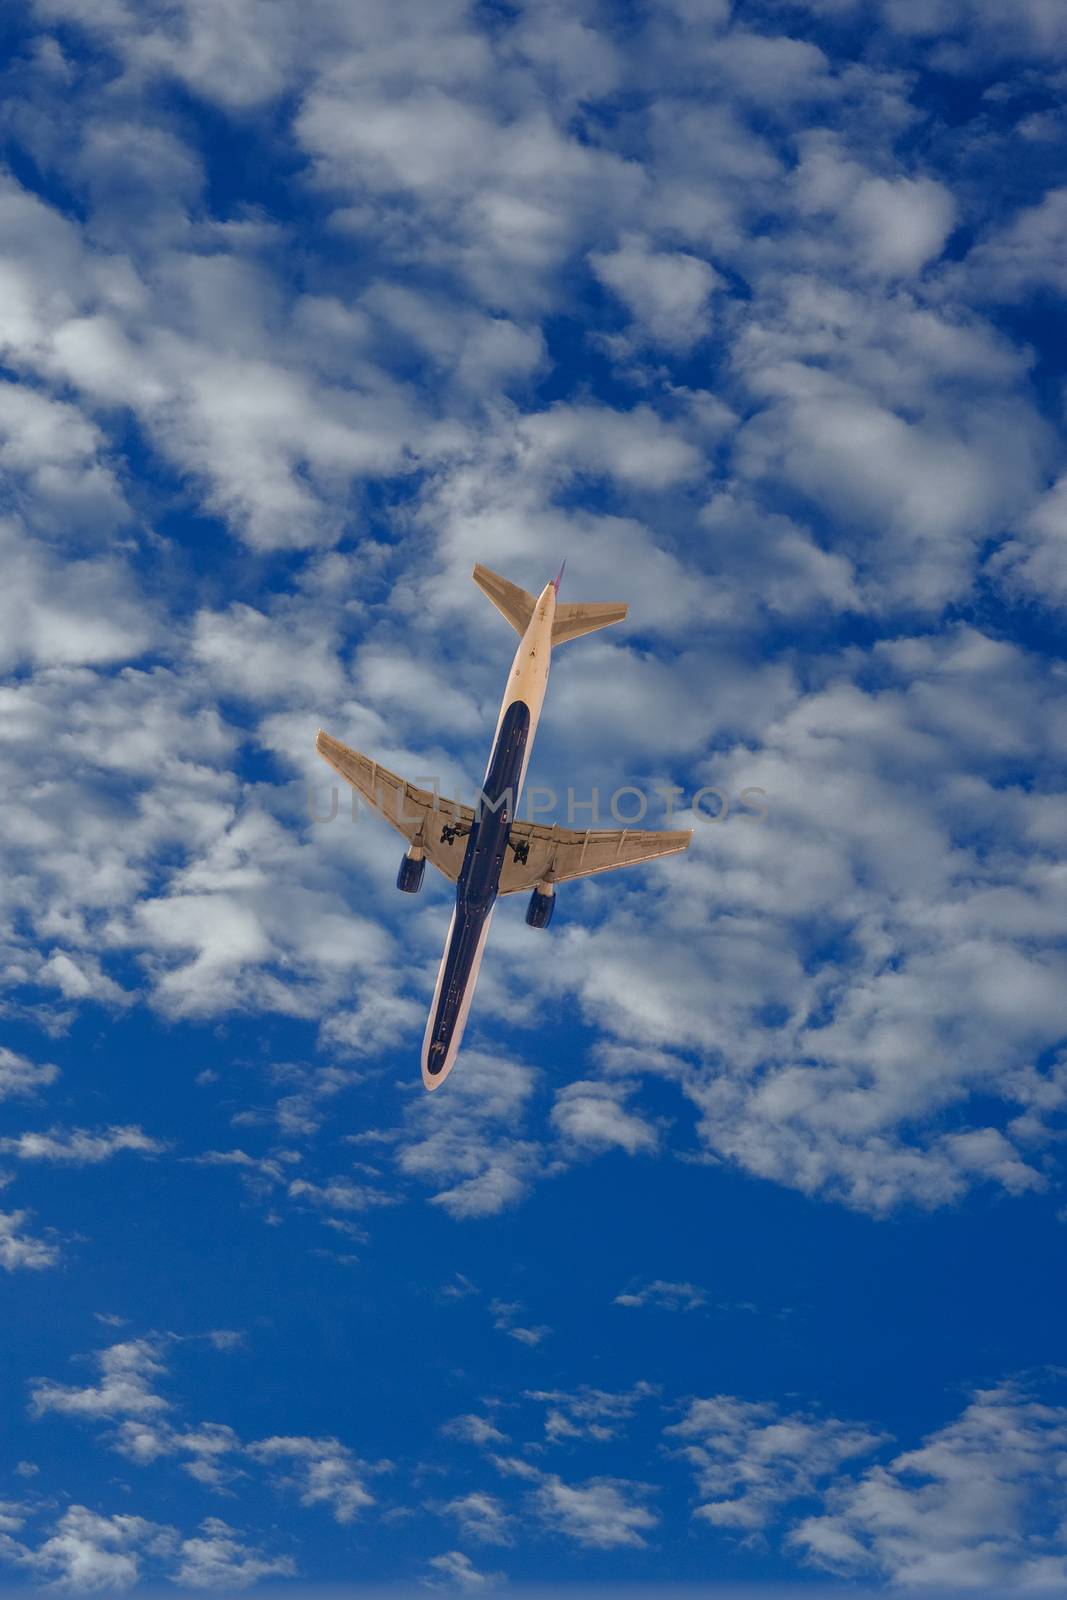 A commercial airplane from below in blue sky